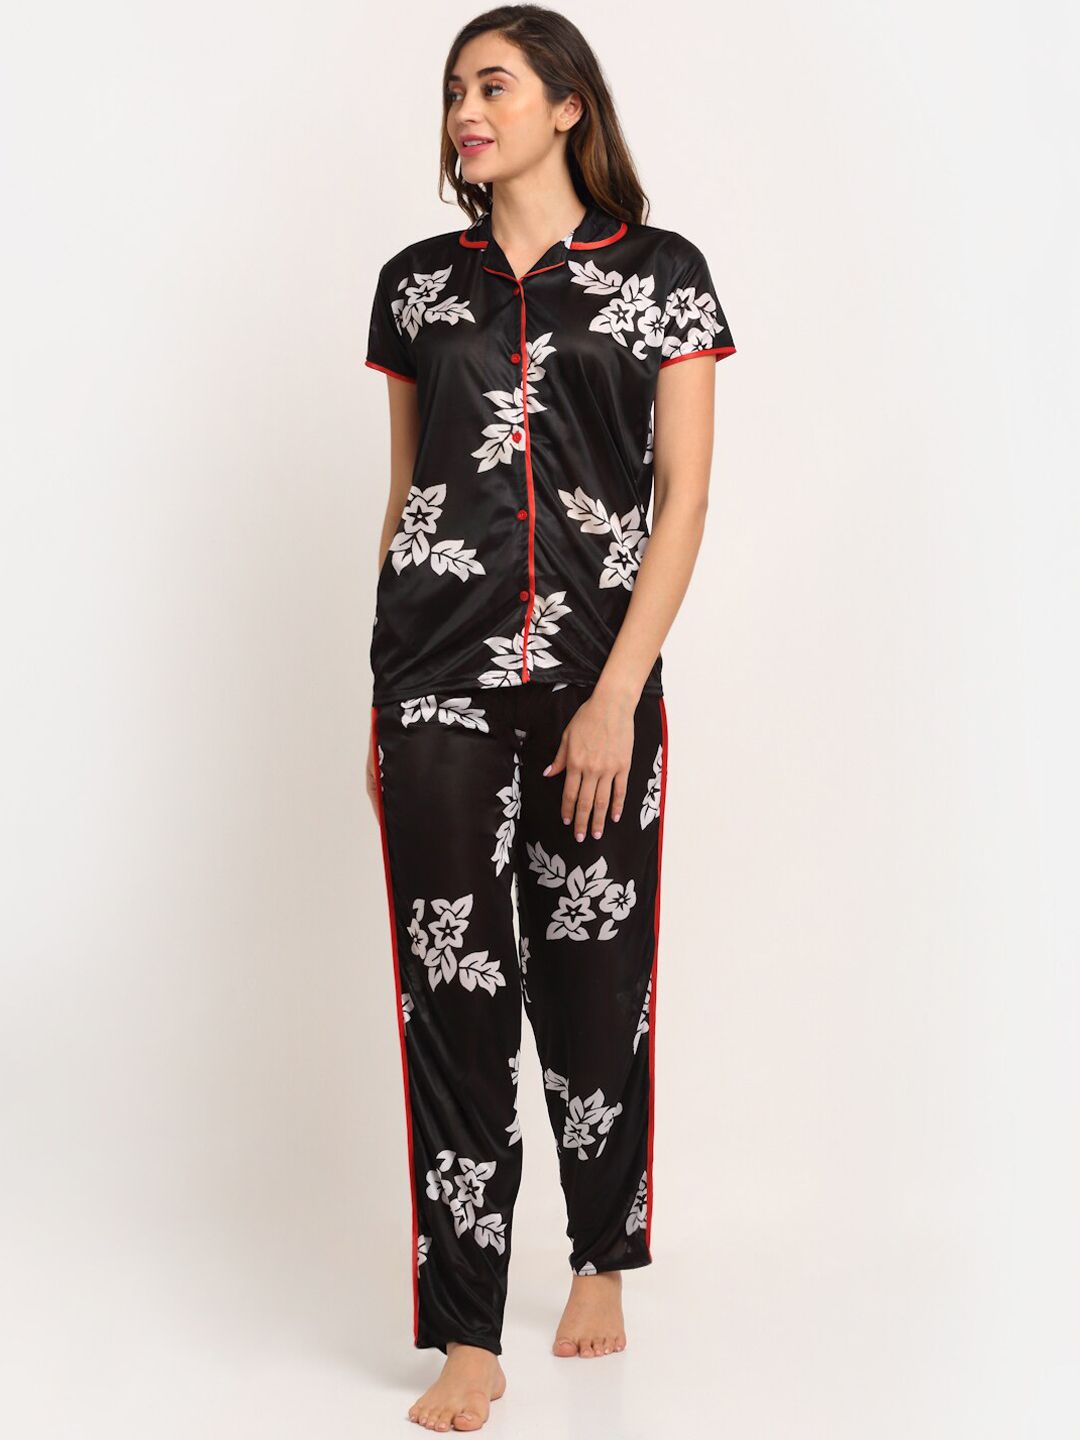 Sidwa Women Black & White Floral Printed Night suit Price in India